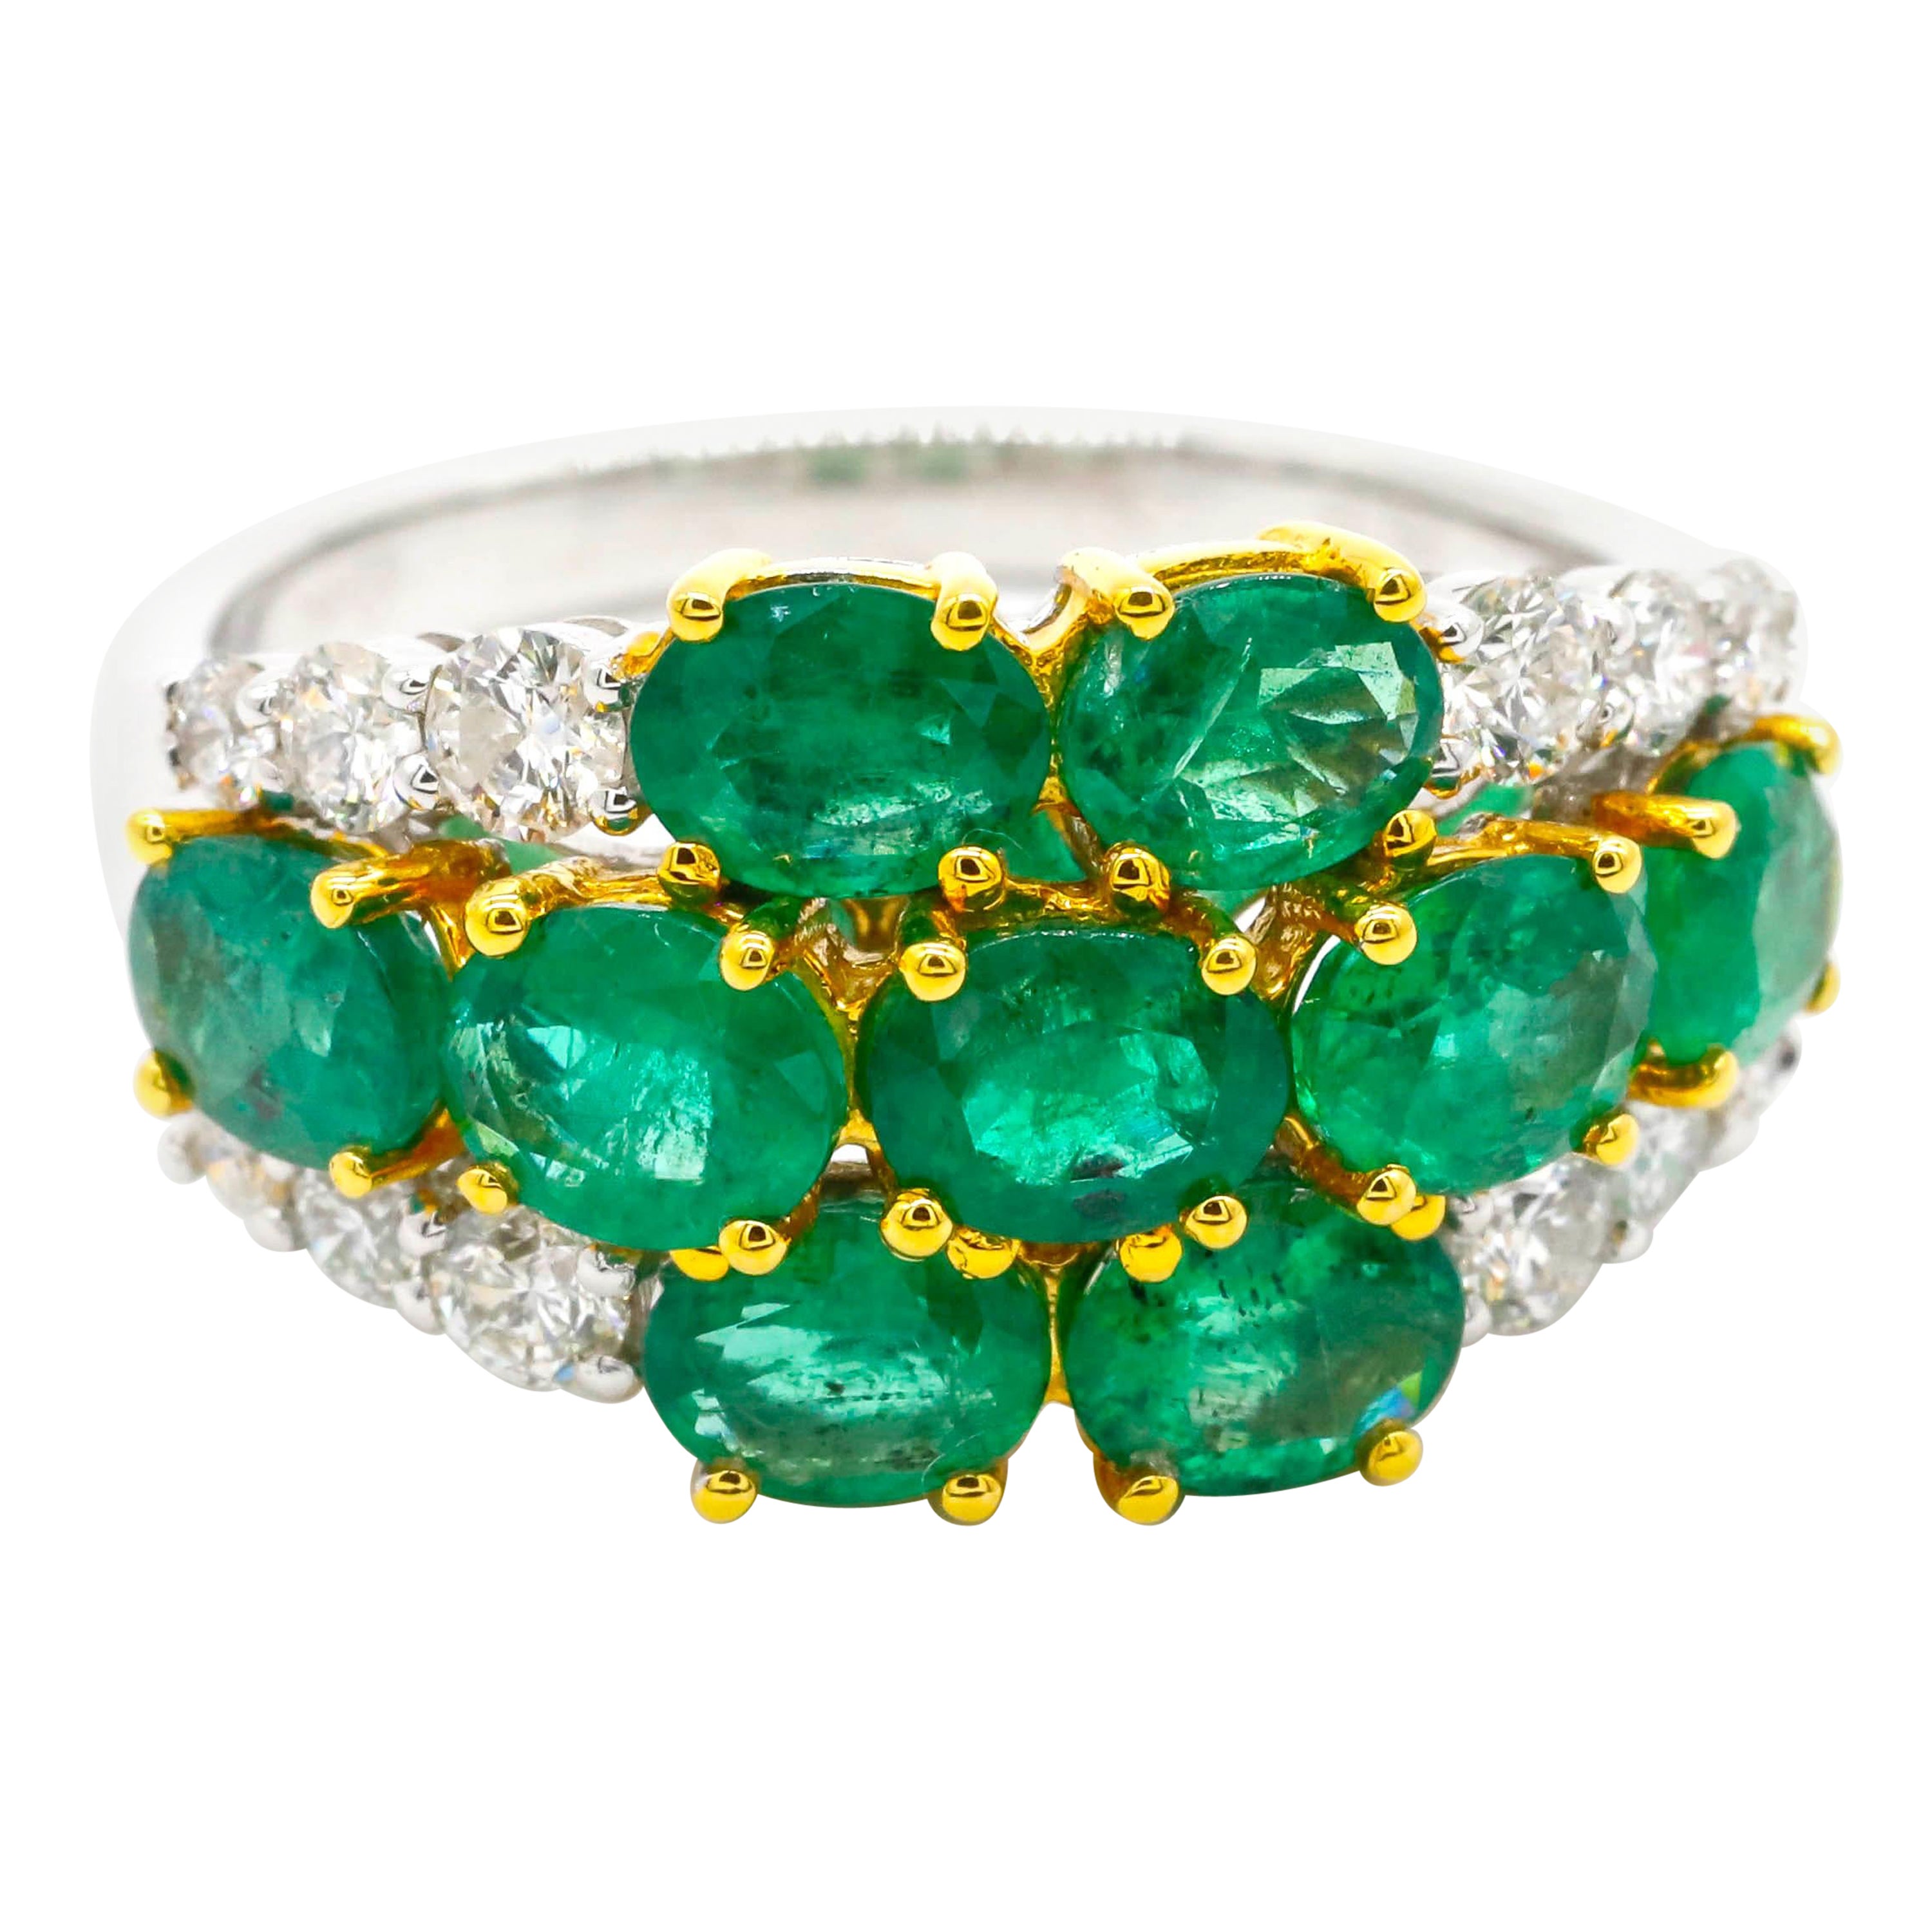 2.76 ct Oval Emerald and 0.53 ct Diamond Accent Floral Ring in 18k Two-Tone Gold